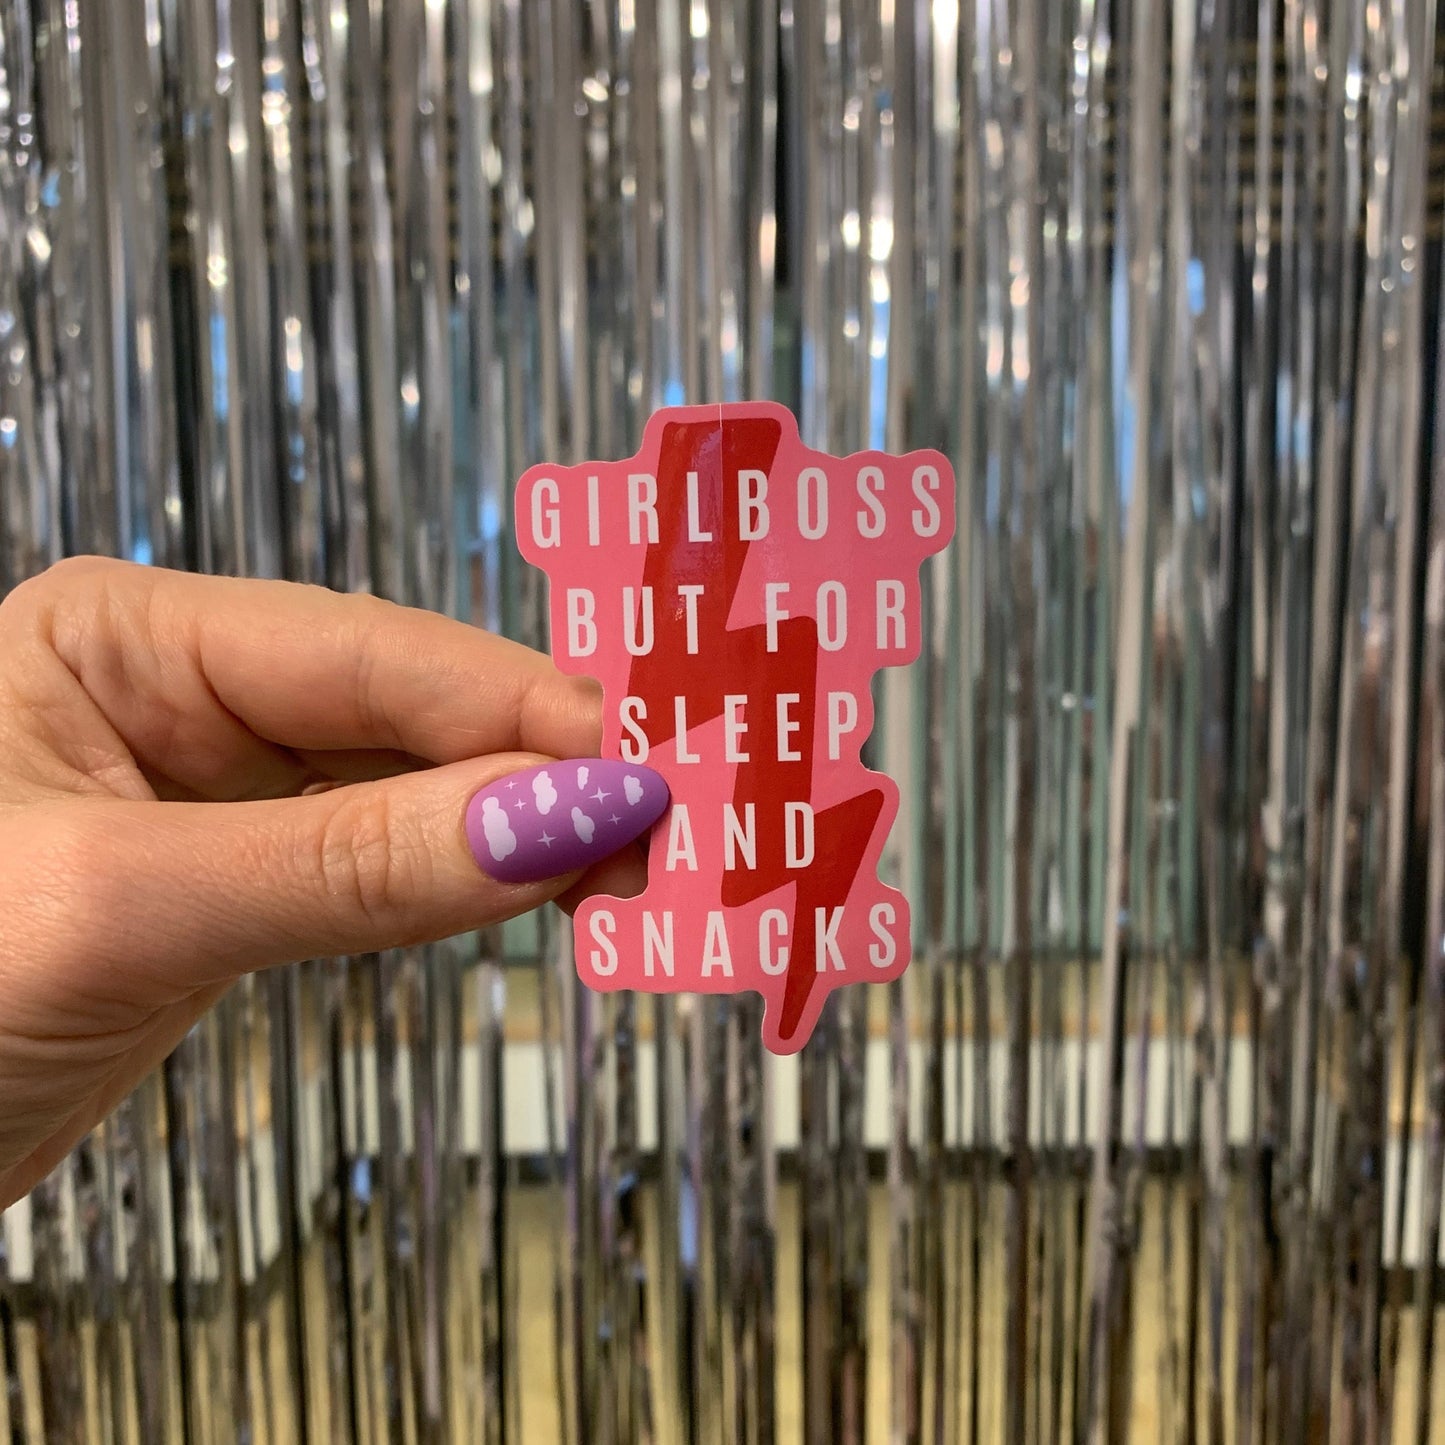 Girl Boss But For Sleep and Snacks Glossy Die Cut Vinyl Sticker 2in x 2.95in